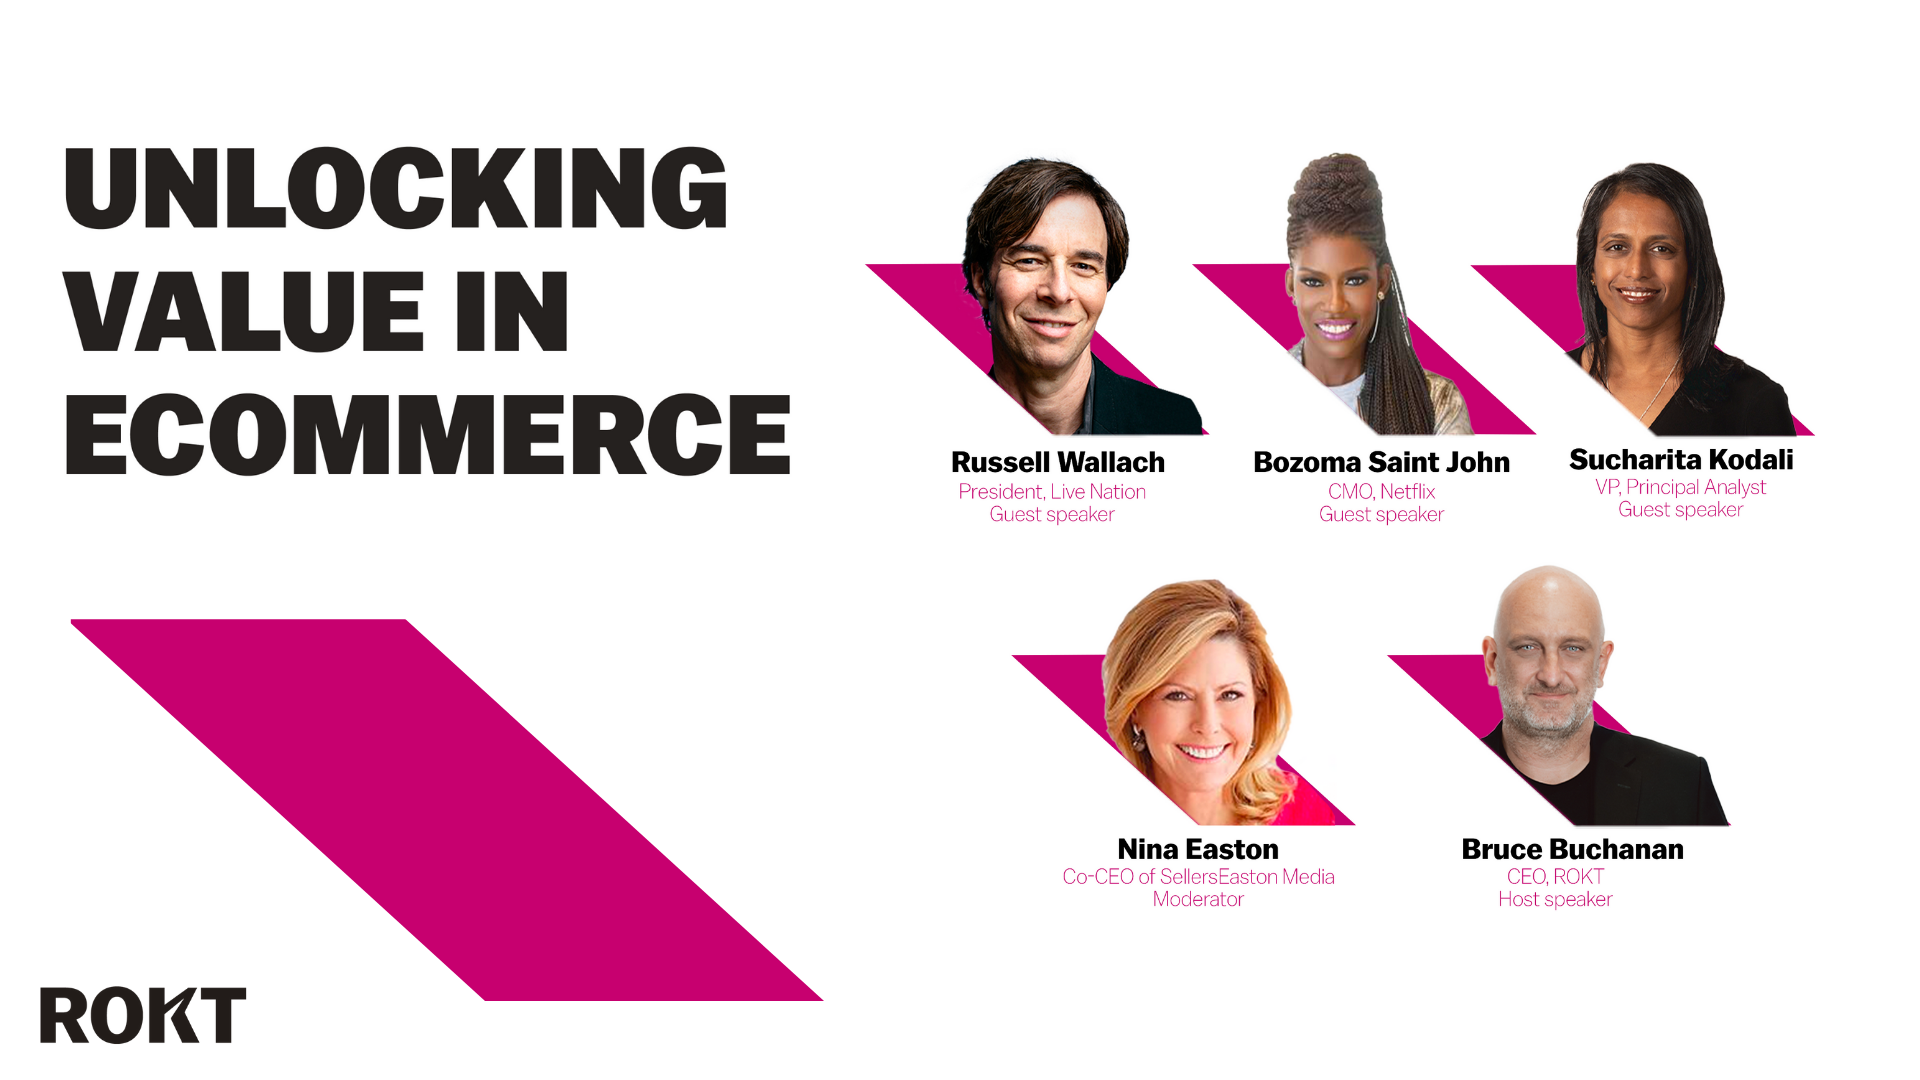 Highlights from Rokt’s ‘Unlocking Value in Ecommerce’ virtual event